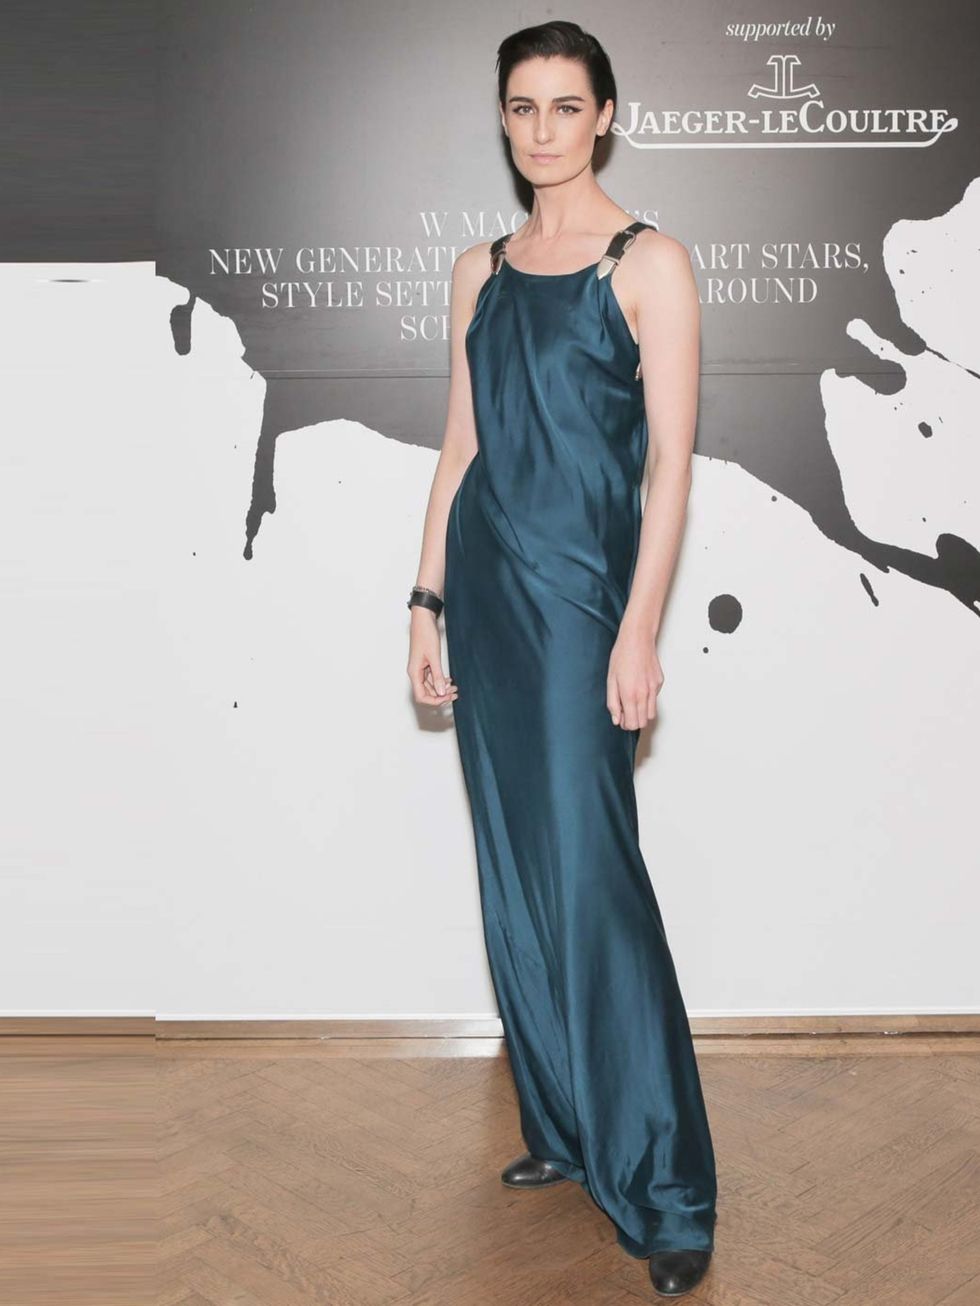 <p><strong>The Gown</strong></p><p><a href="http://www.elleuk.com/star-style/celebrity-style-files/erin-o-connor">Erin O'Connor</a> at the Generation W issue launch event, New York, September 2012. </p><p><em><a href="http://www.elleuk.com/star-style/cele